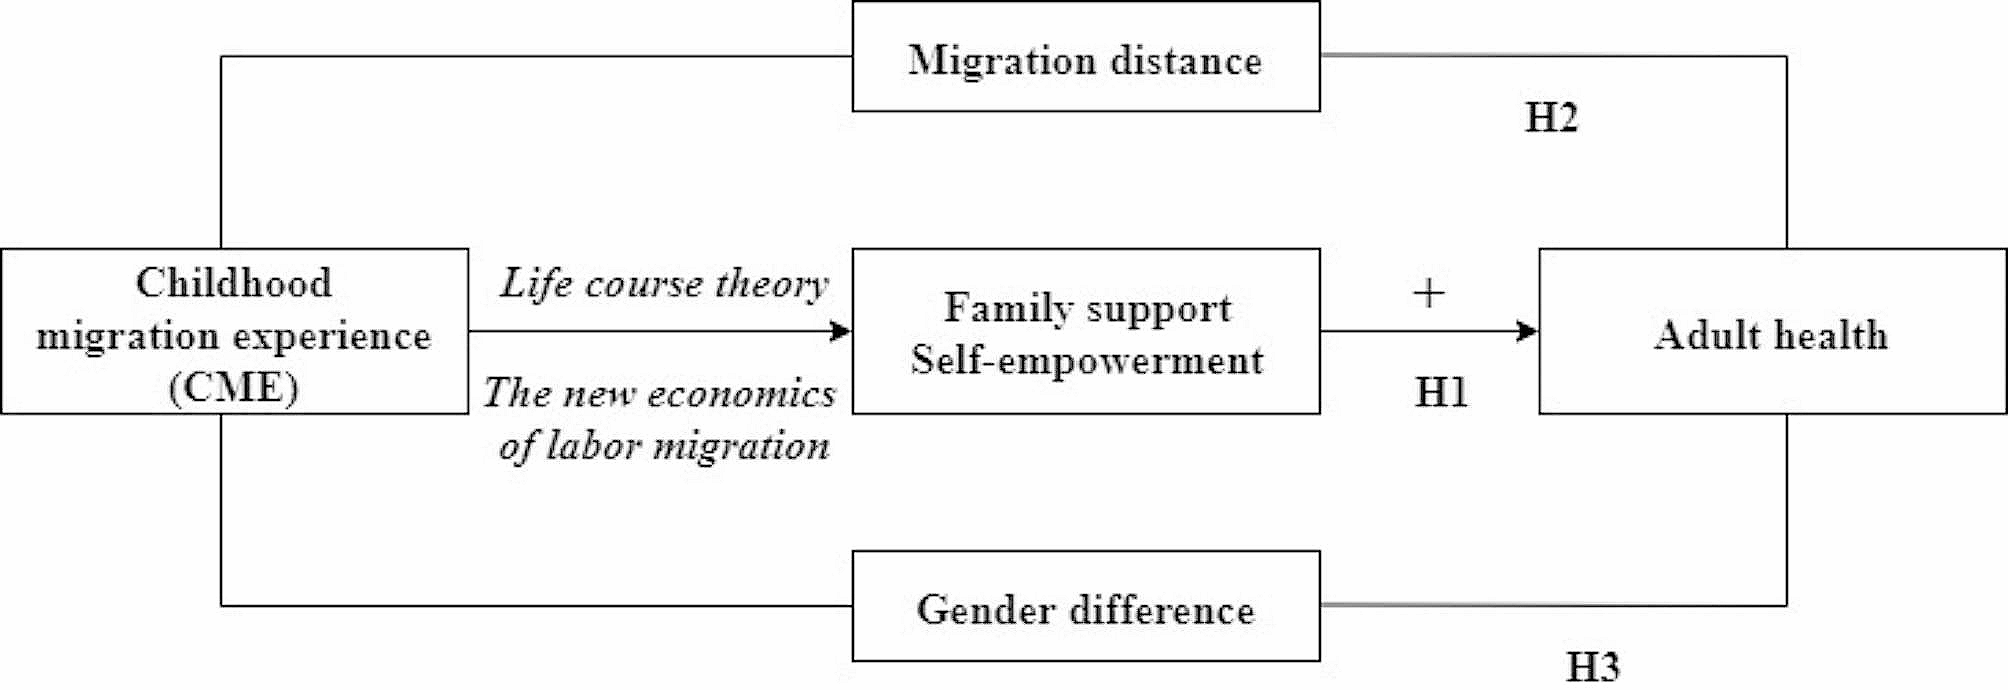 Childhood migration experience and adult health: evidence from China’s rural migrants